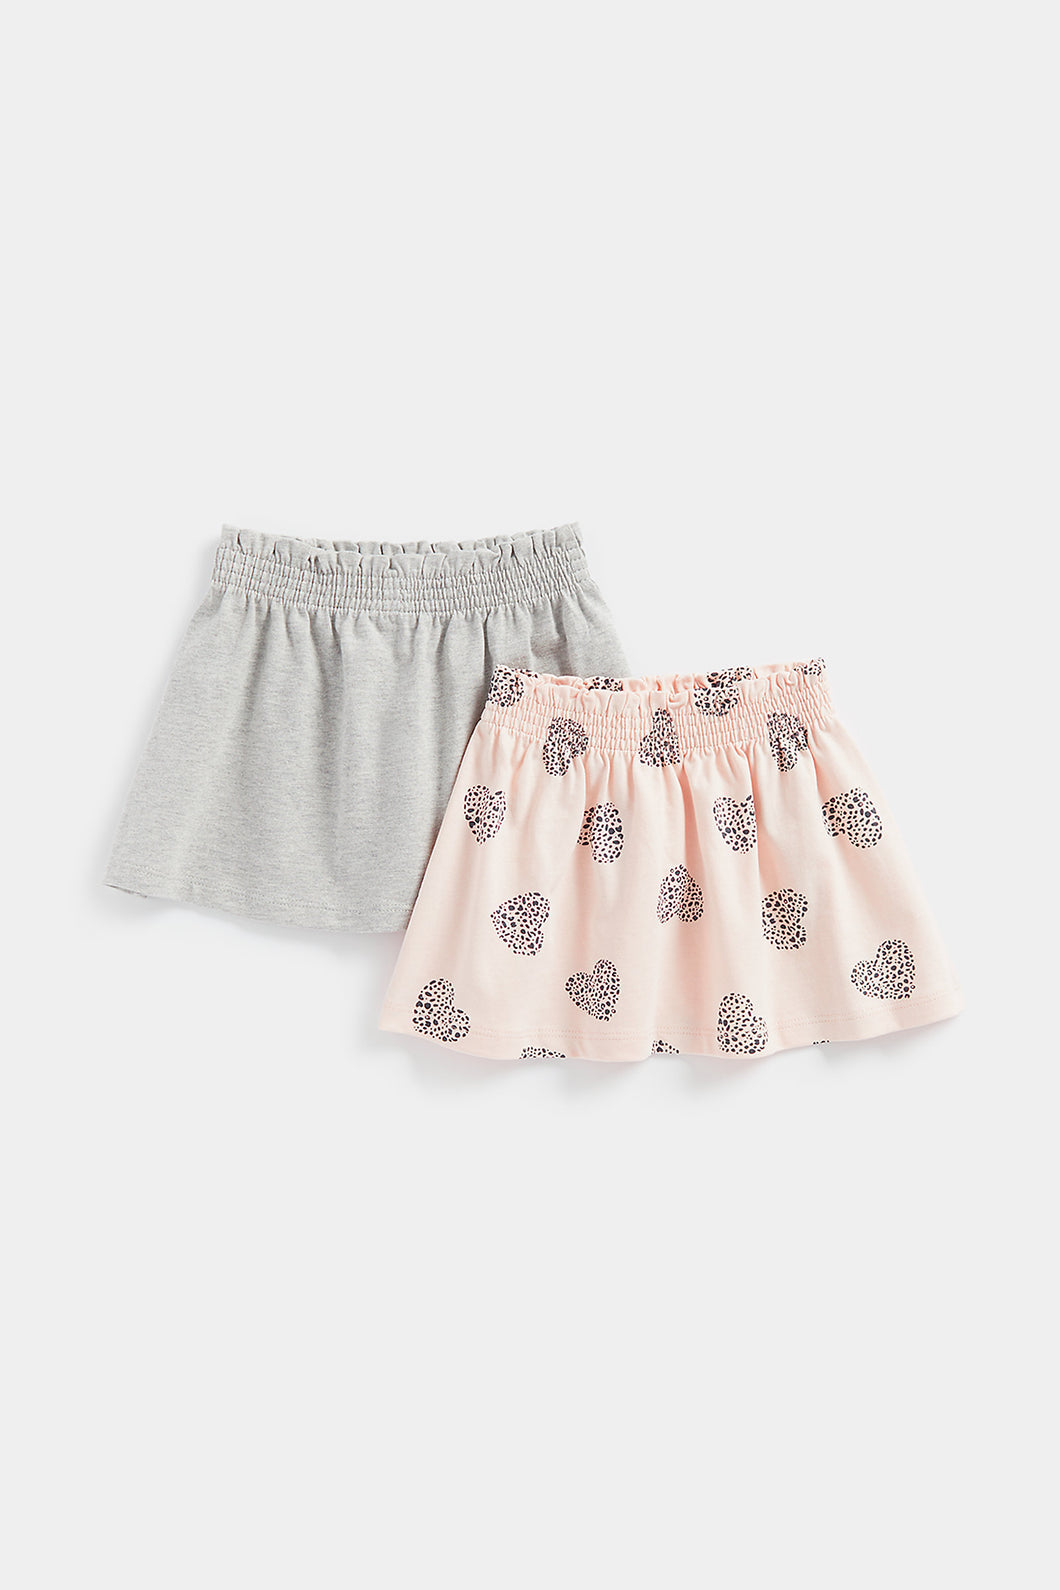 Mothercare Jersey Skirts - 2 Pack